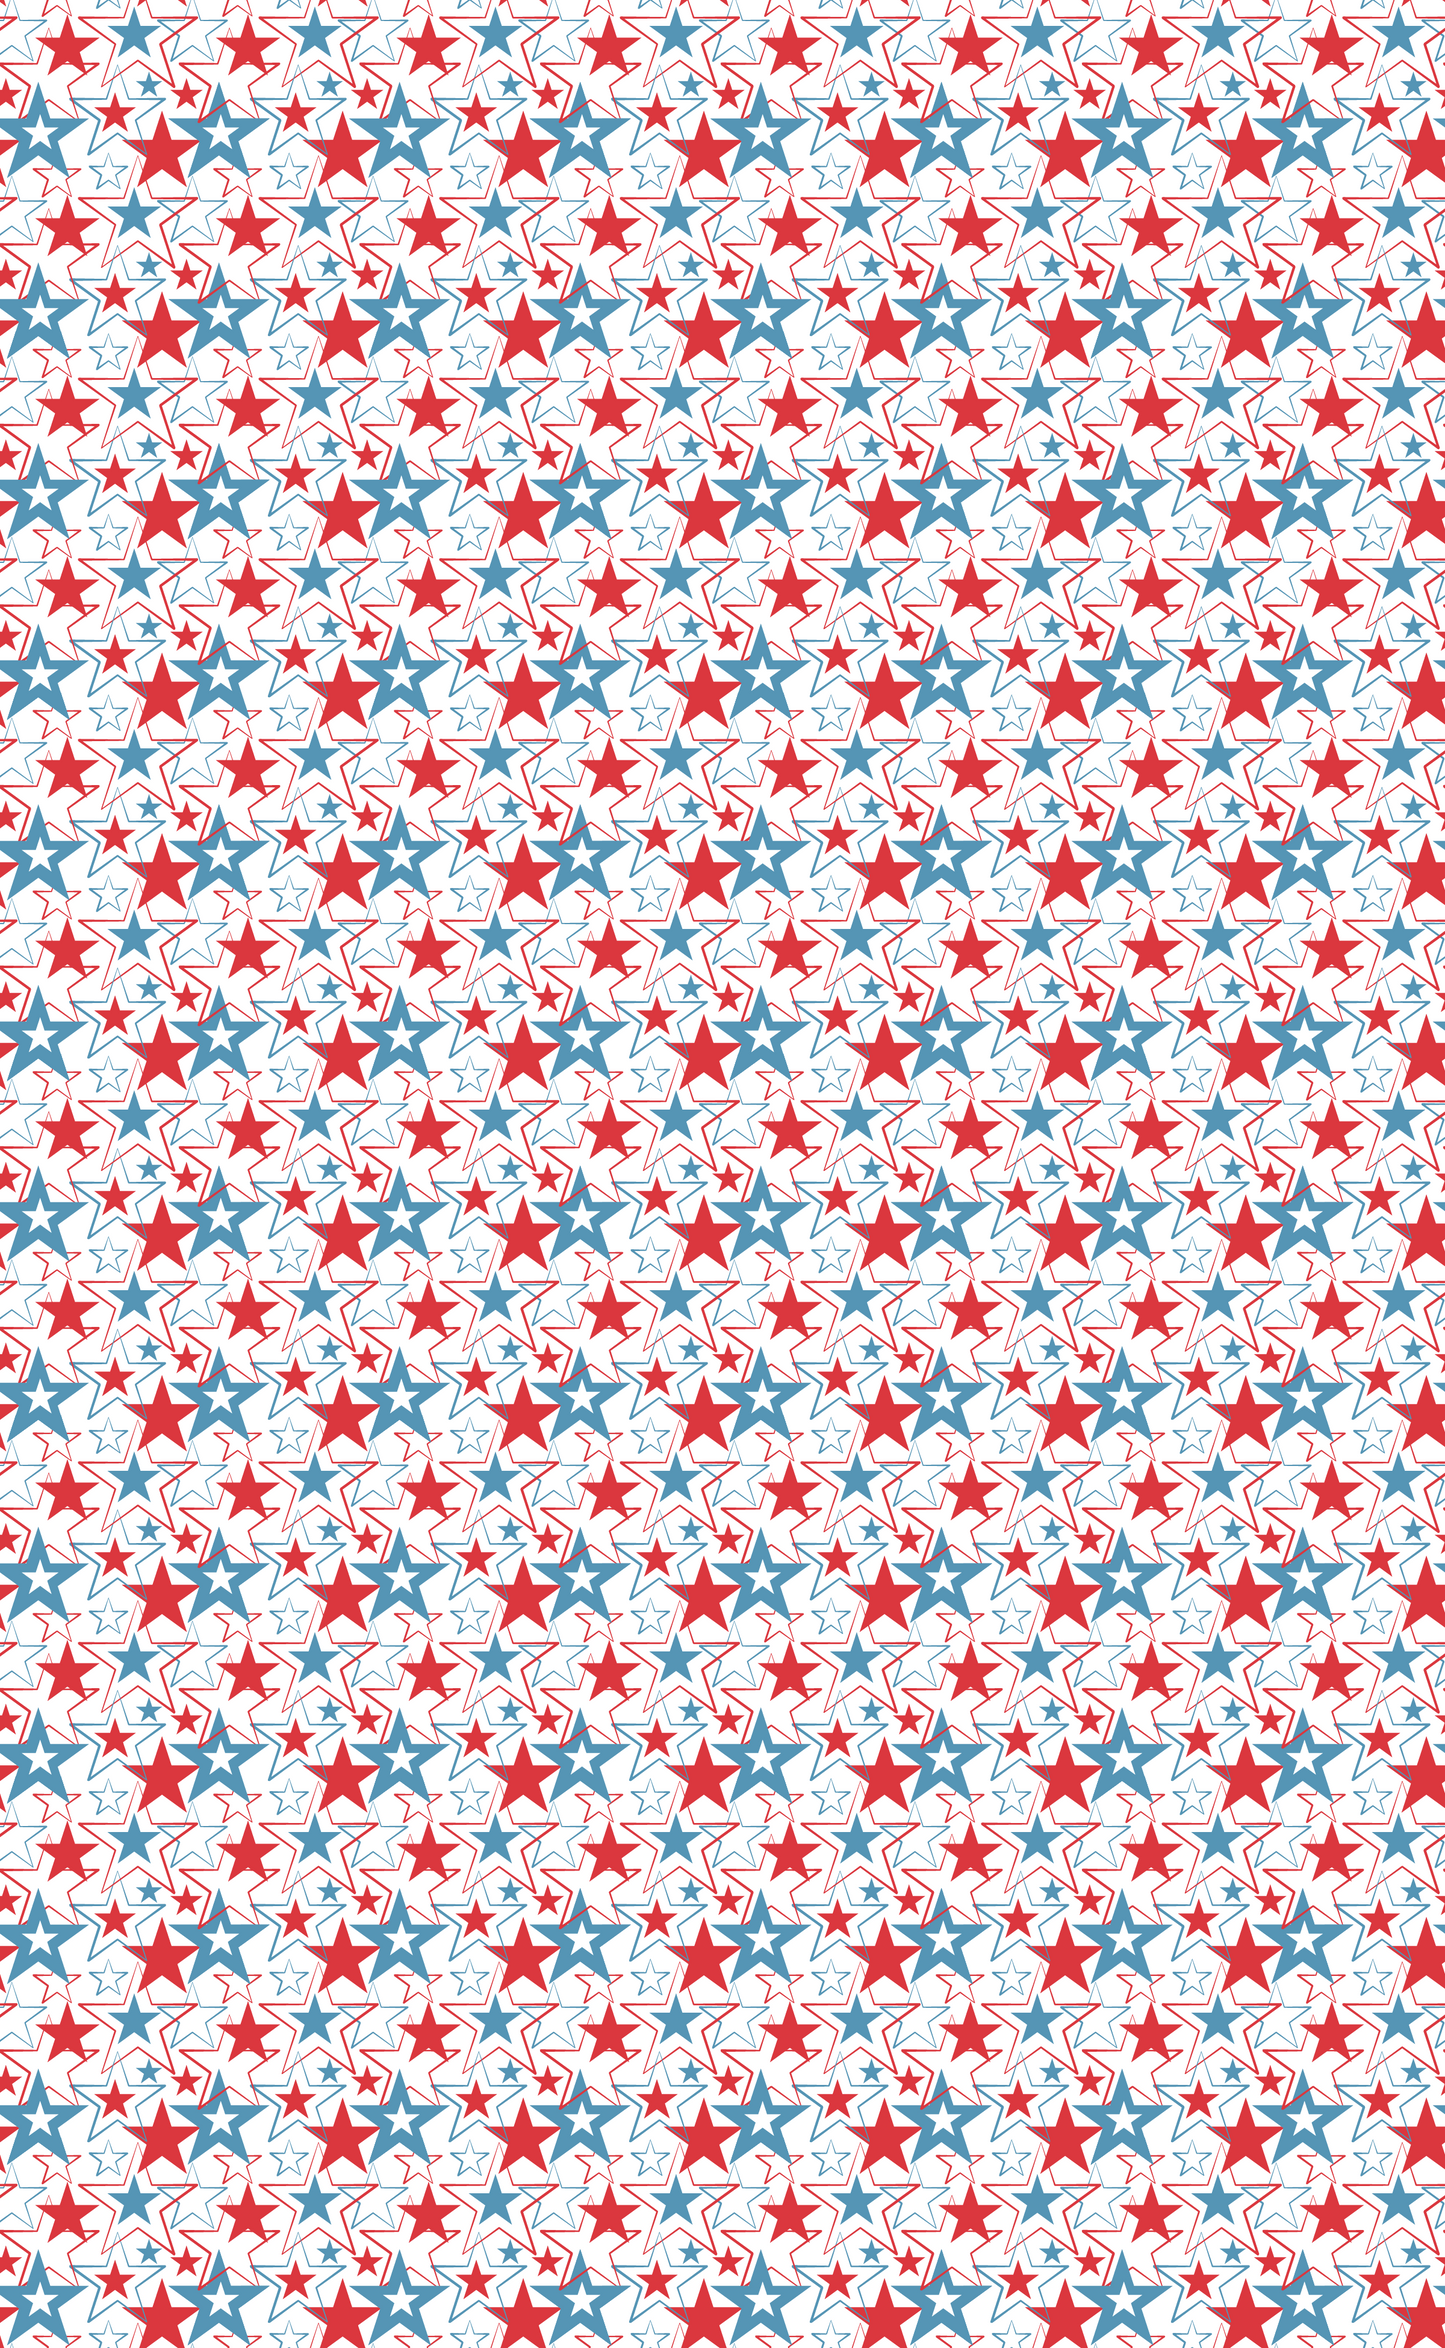 Red White and Blue Stars (8x13" Faux Leather)